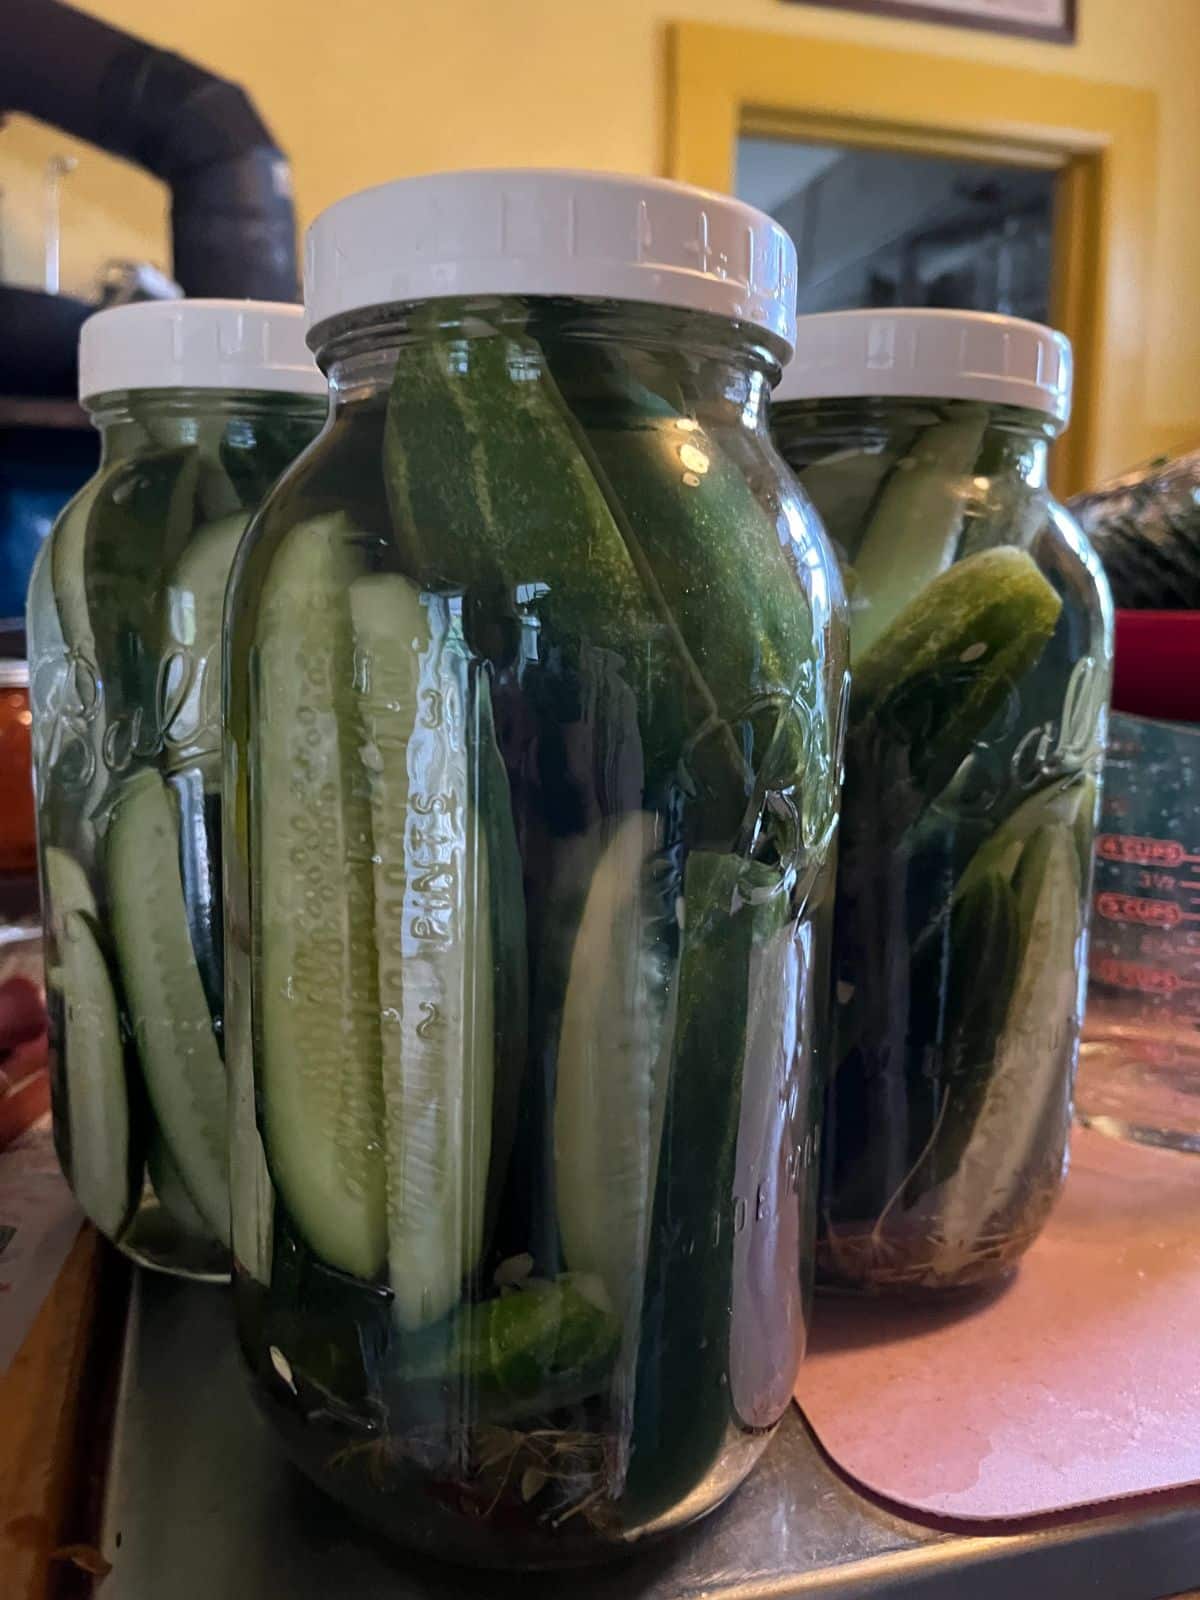 Jars of refrigerator pickles made with 5% white vinegar